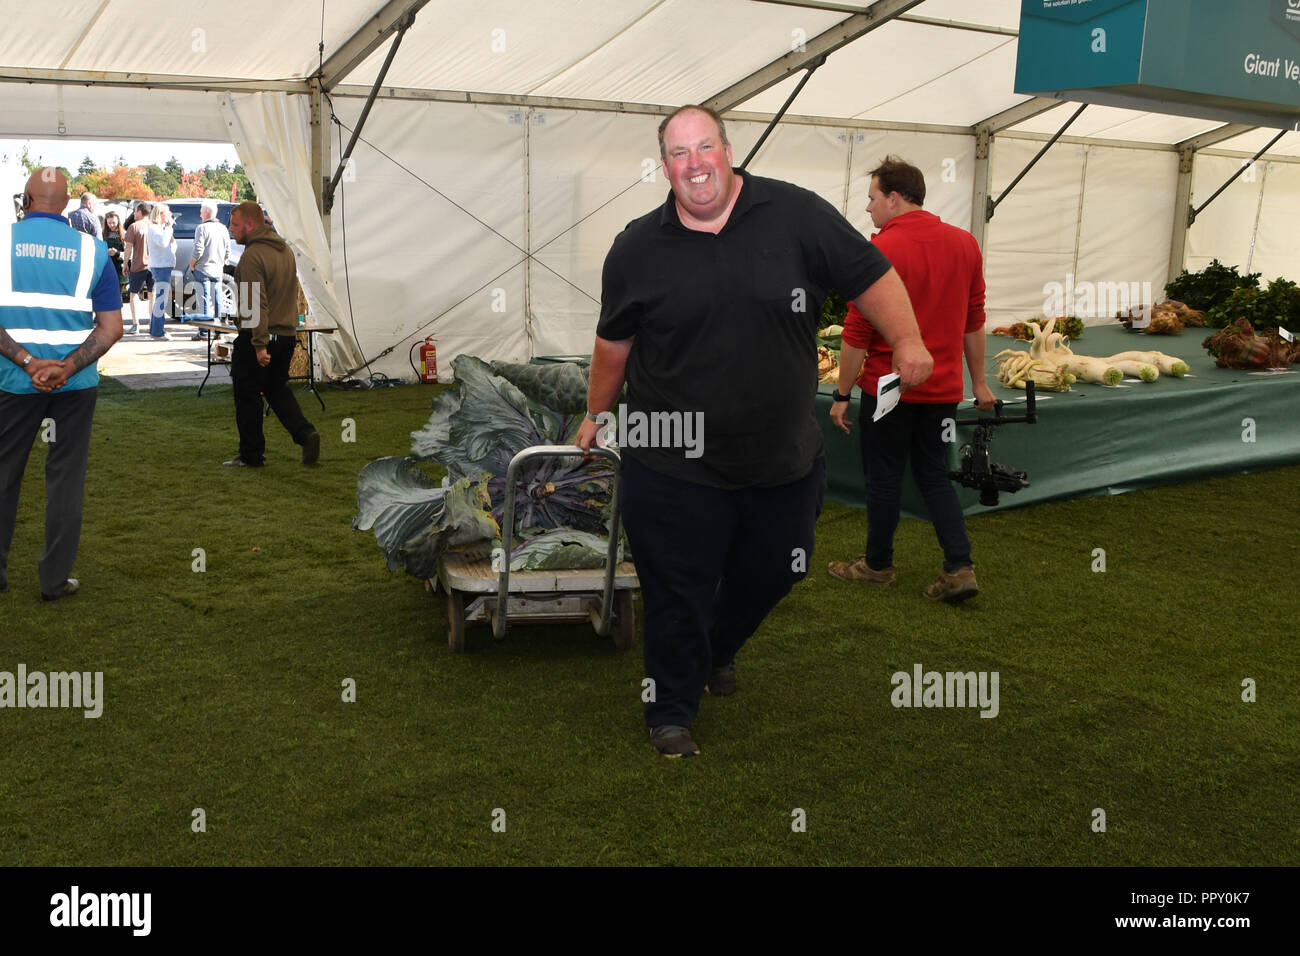 Malvern Three Counties Showground, Worcestershire, UK, 28th September 2018. The Malvern Autumn Show hosts the annual UK National Giant vegetables championship. Tim Saint from Reading here with his red cabbage weighing in at 23.7kg setting the new world record. The previous was 23.2kg Credit: Simon Maycock/Alamy Live News Stock Photo